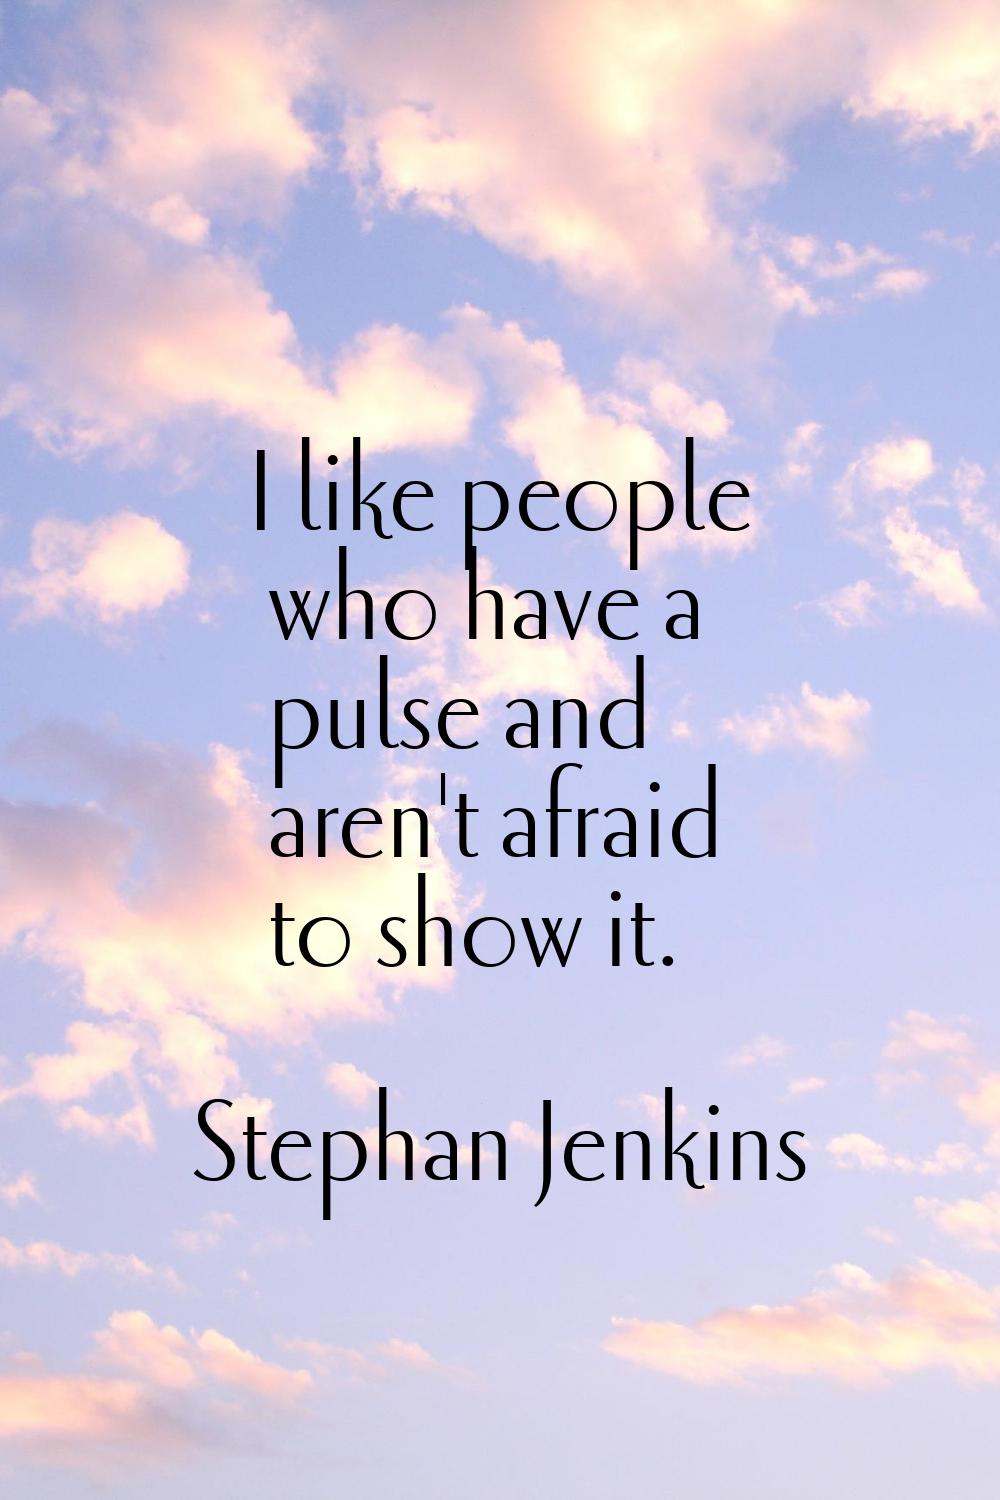 I like people who have a pulse and aren't afraid to show it.